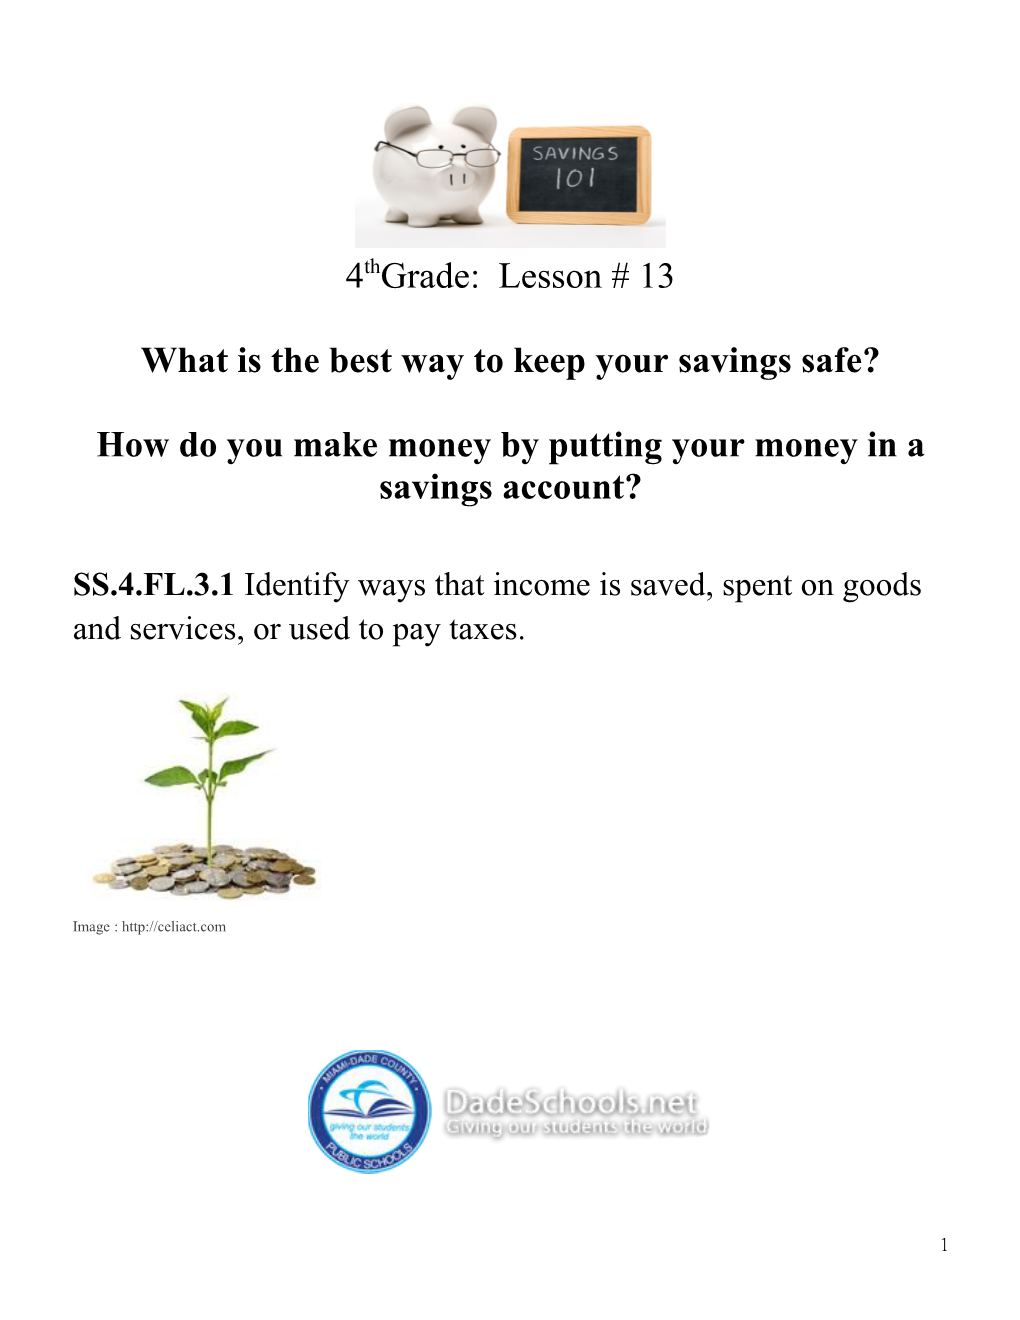 What Is the Best Way to Keep Your Savings Safe?